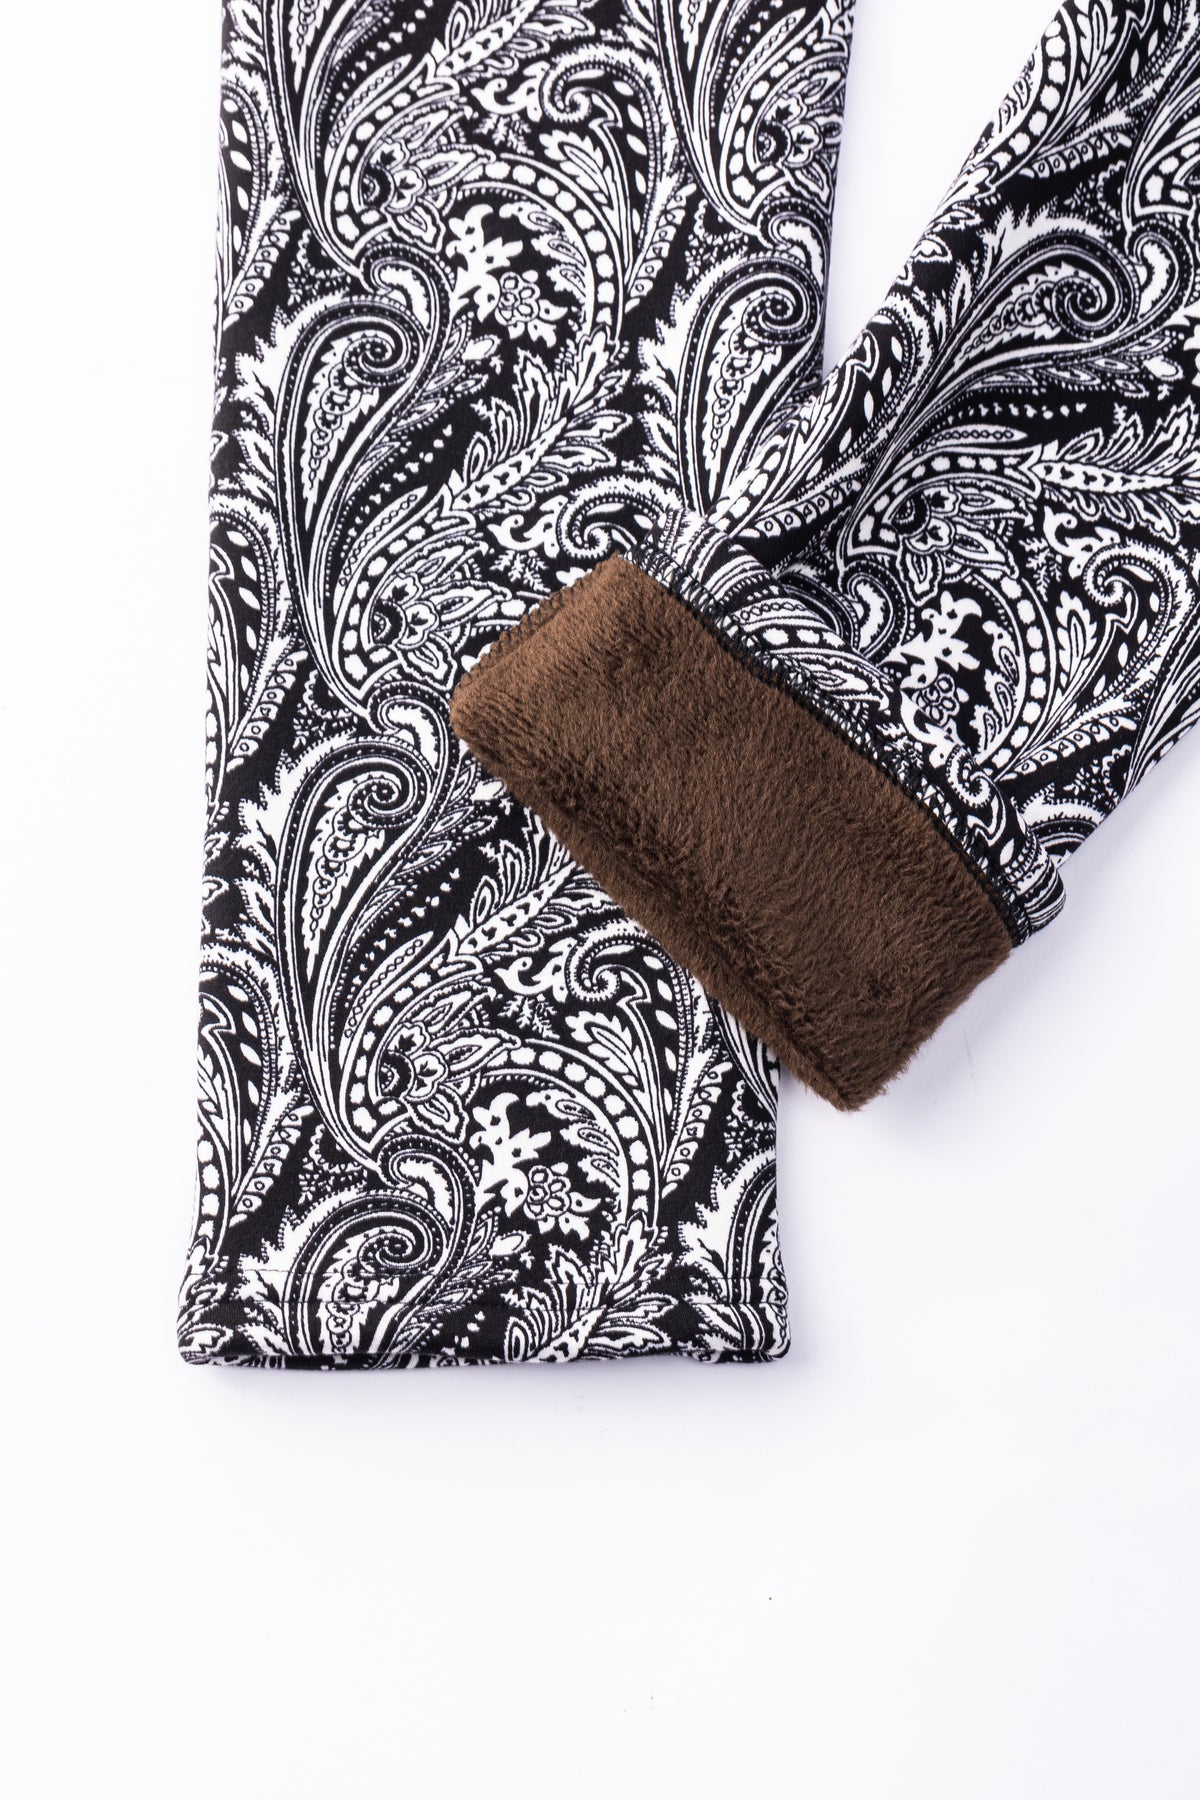 Paisley B&W - Cozy Lined